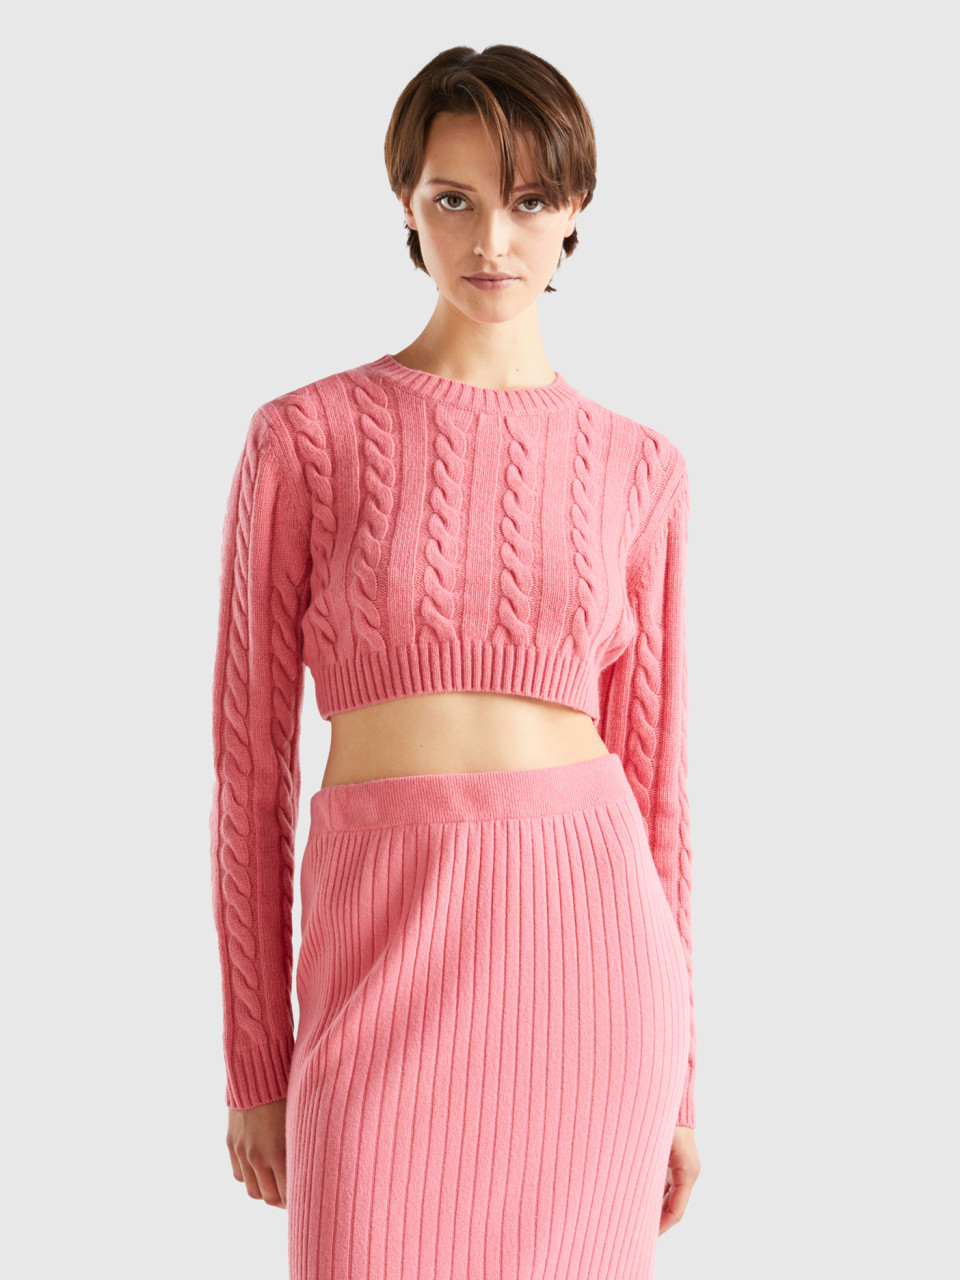 Benetton, Cropped Sweater With Cables, Pink, Women